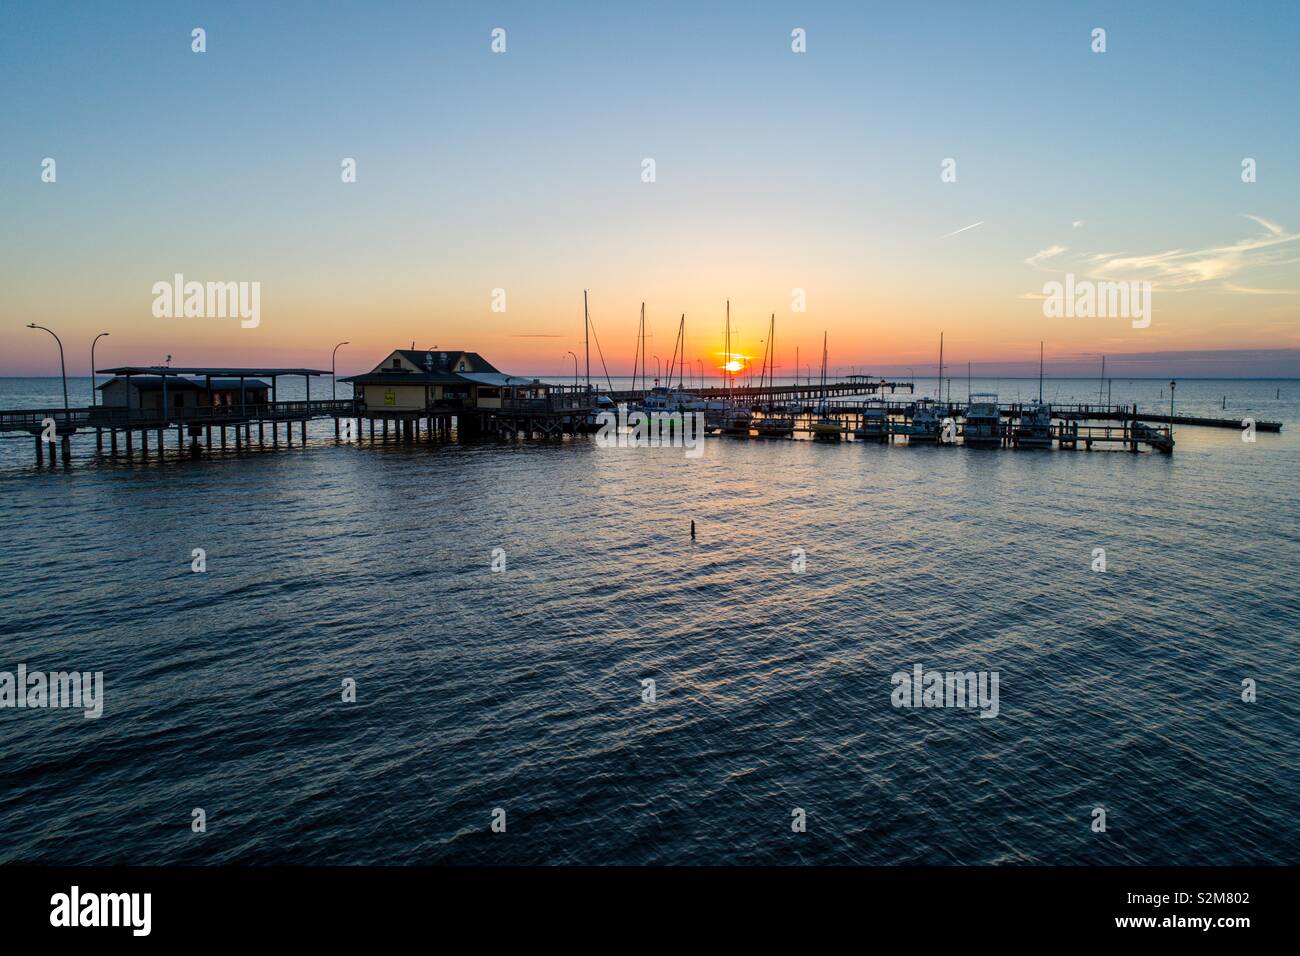 Fairhope pier on Mobile Bay, Alabama at sunset Stock Photo